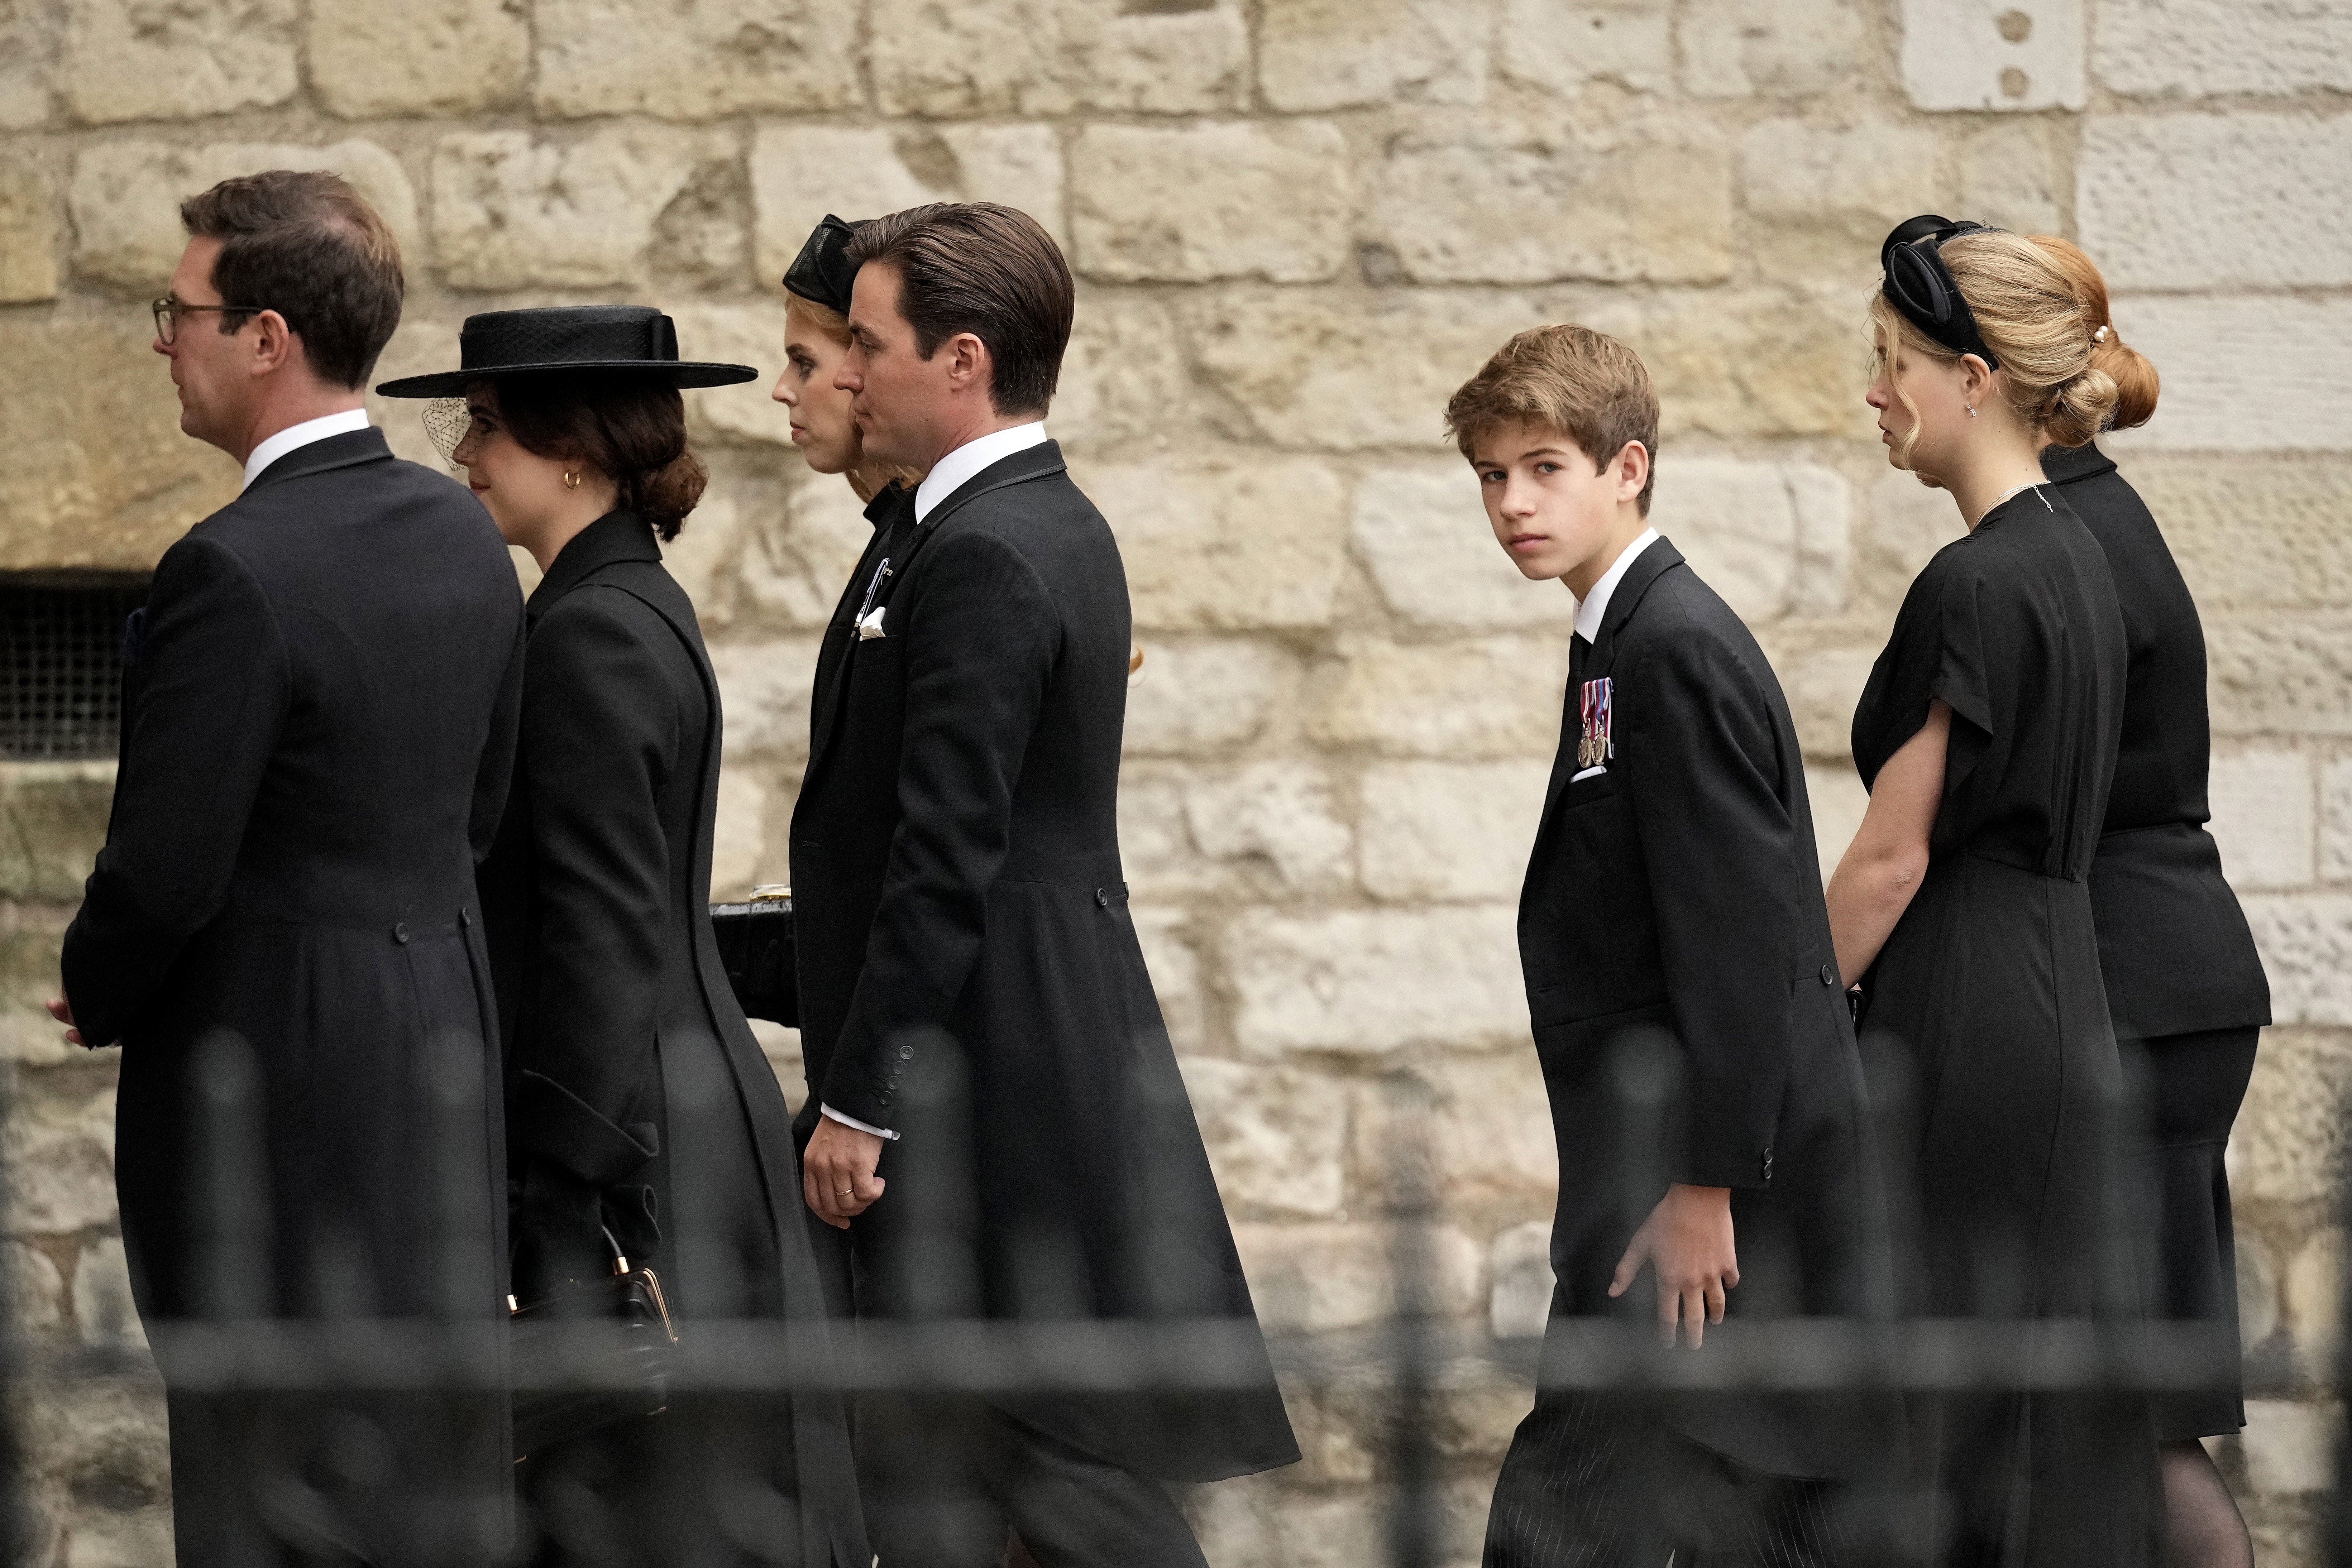 James, Viscount Severn, and the Britsh Royal Family members arrive at Westminster Abbey for the State Funeral of Queen Elizabeth II on September 19, 2022, in London, England. | Source: Getty Images